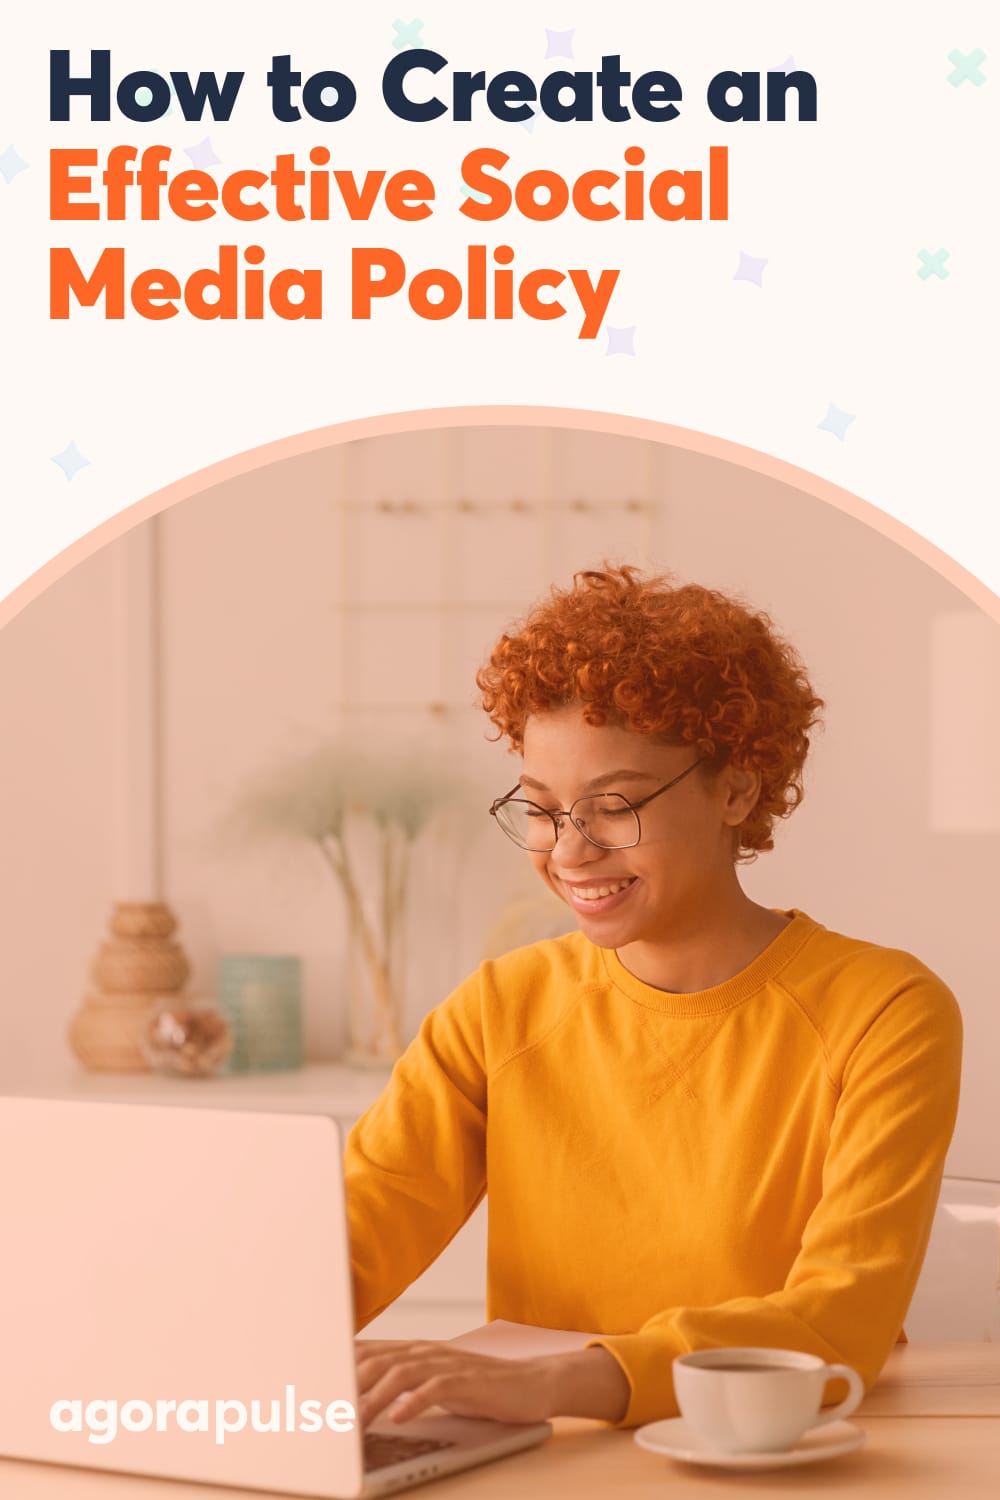 How to Create an Effective Social Media Policy